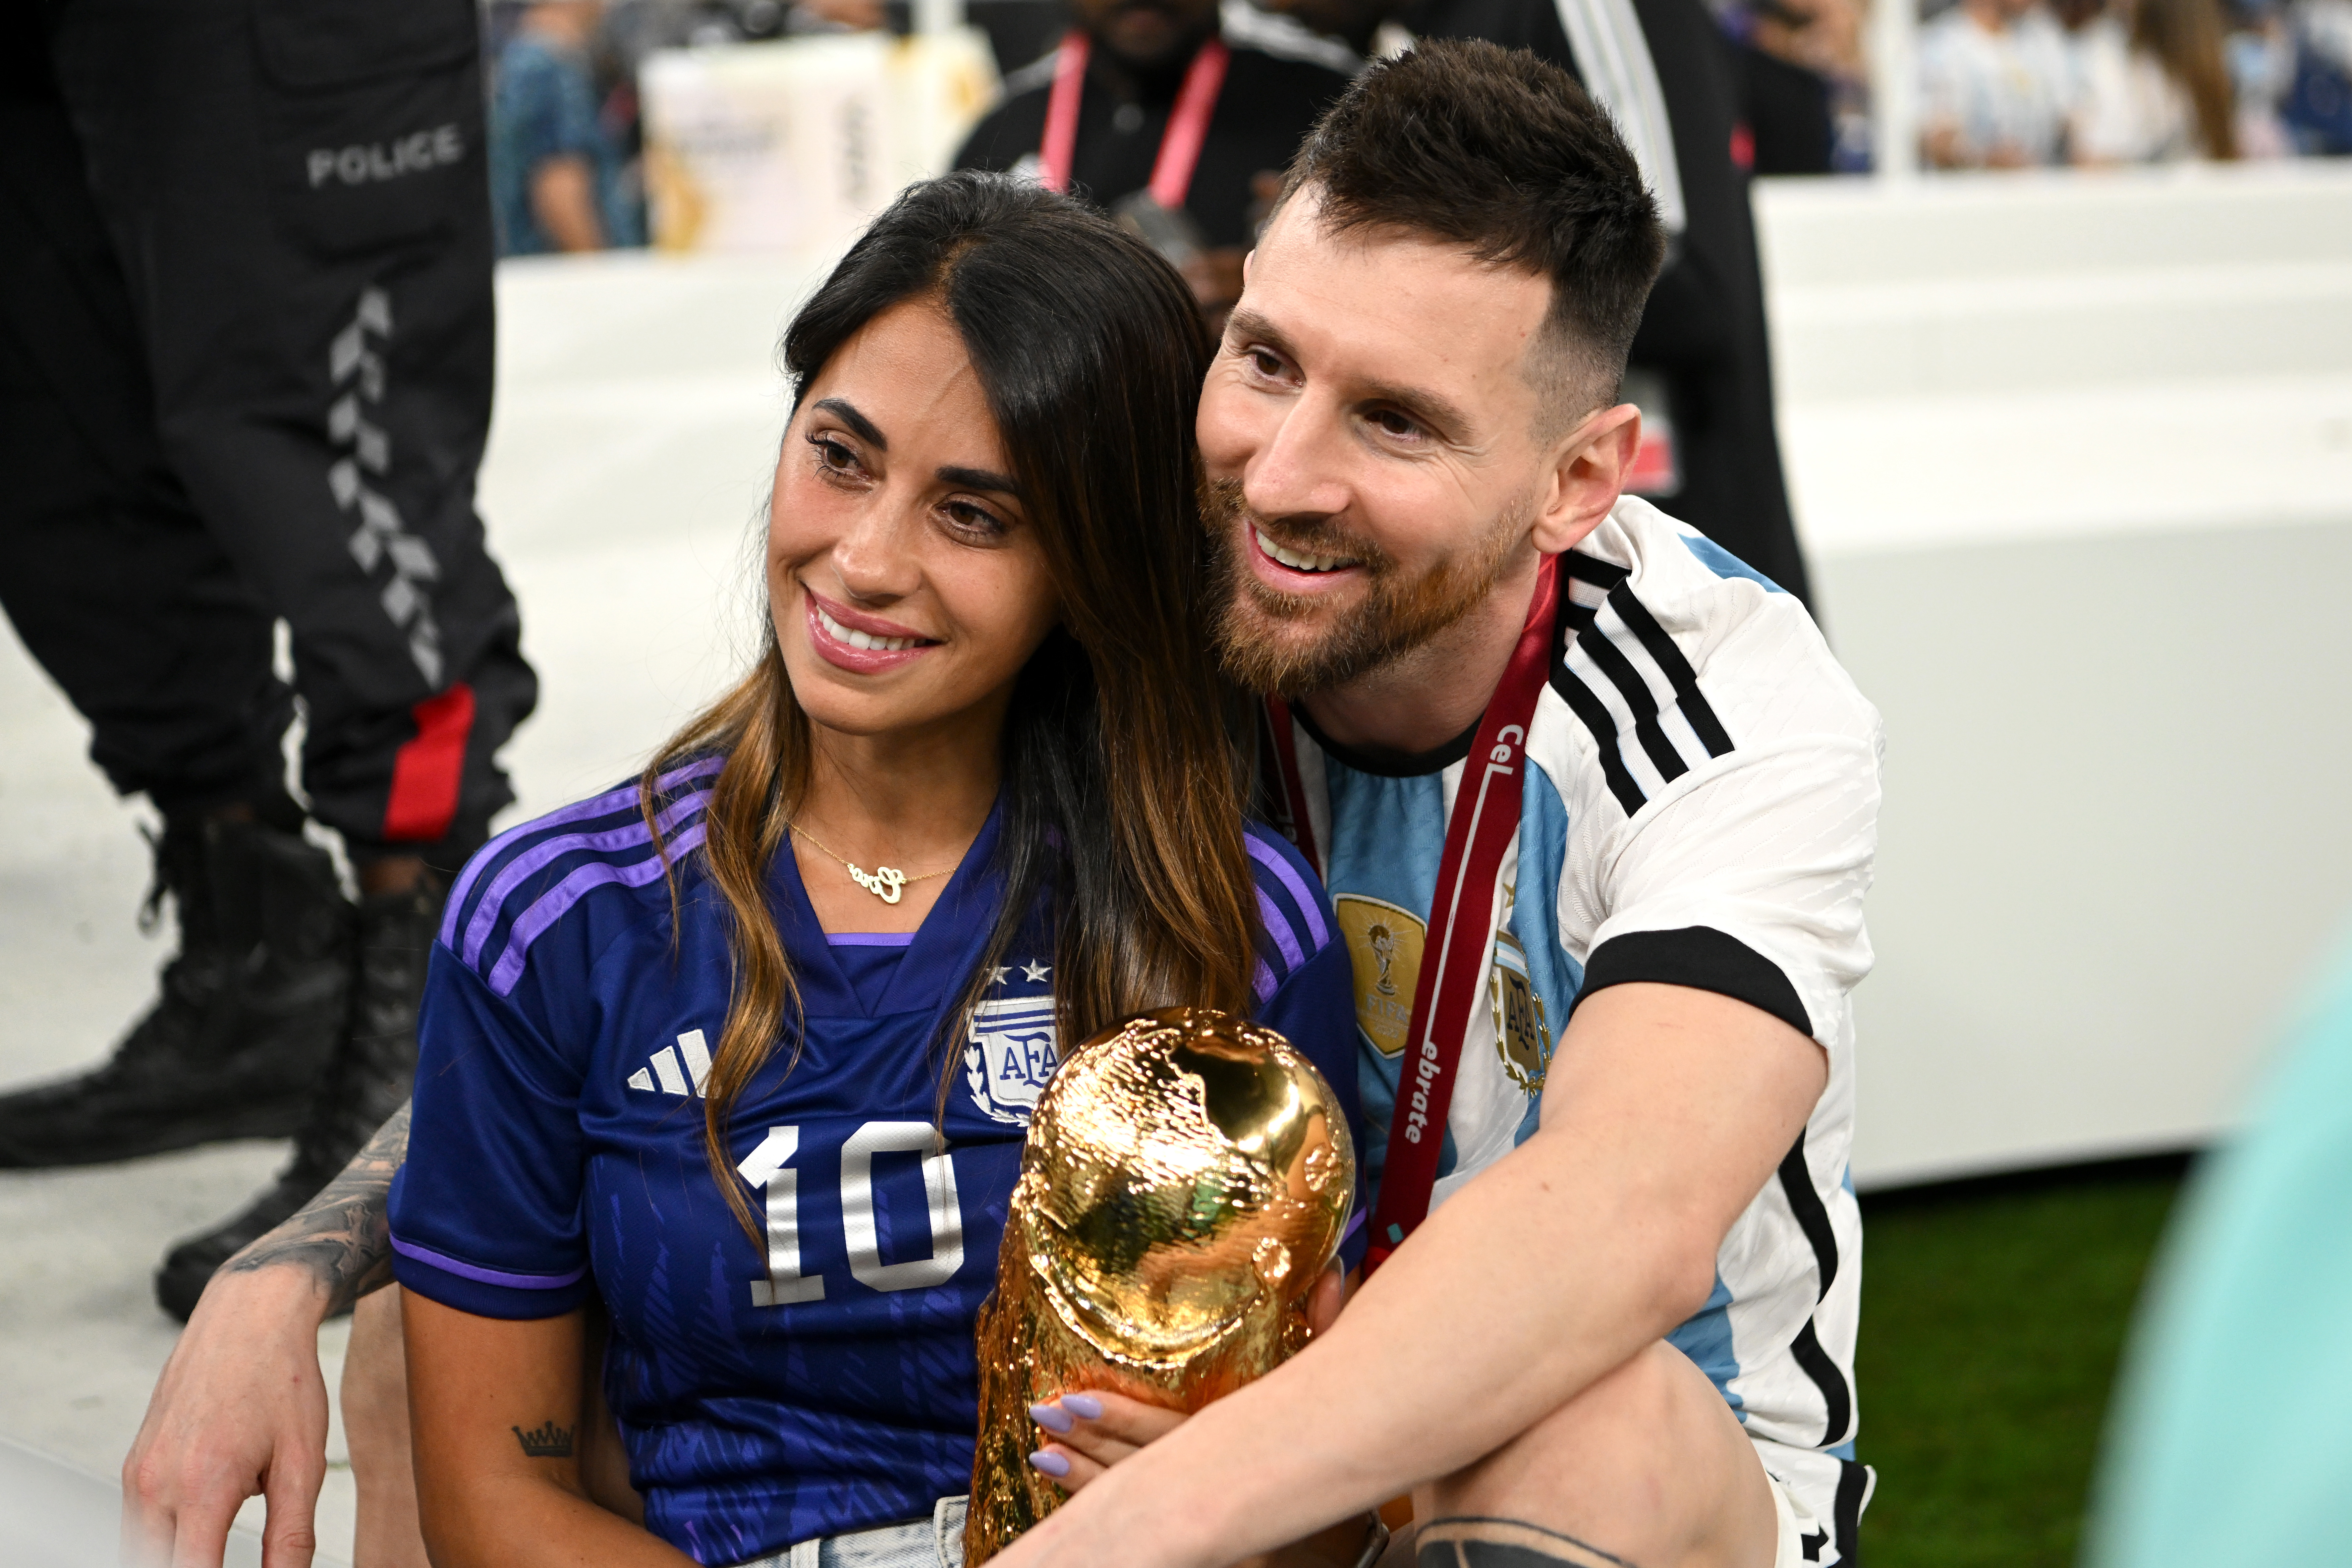 , Crying woman who Lionel Messi emotionally hugged after World Cup final revealed to be much-loved Argentina cook